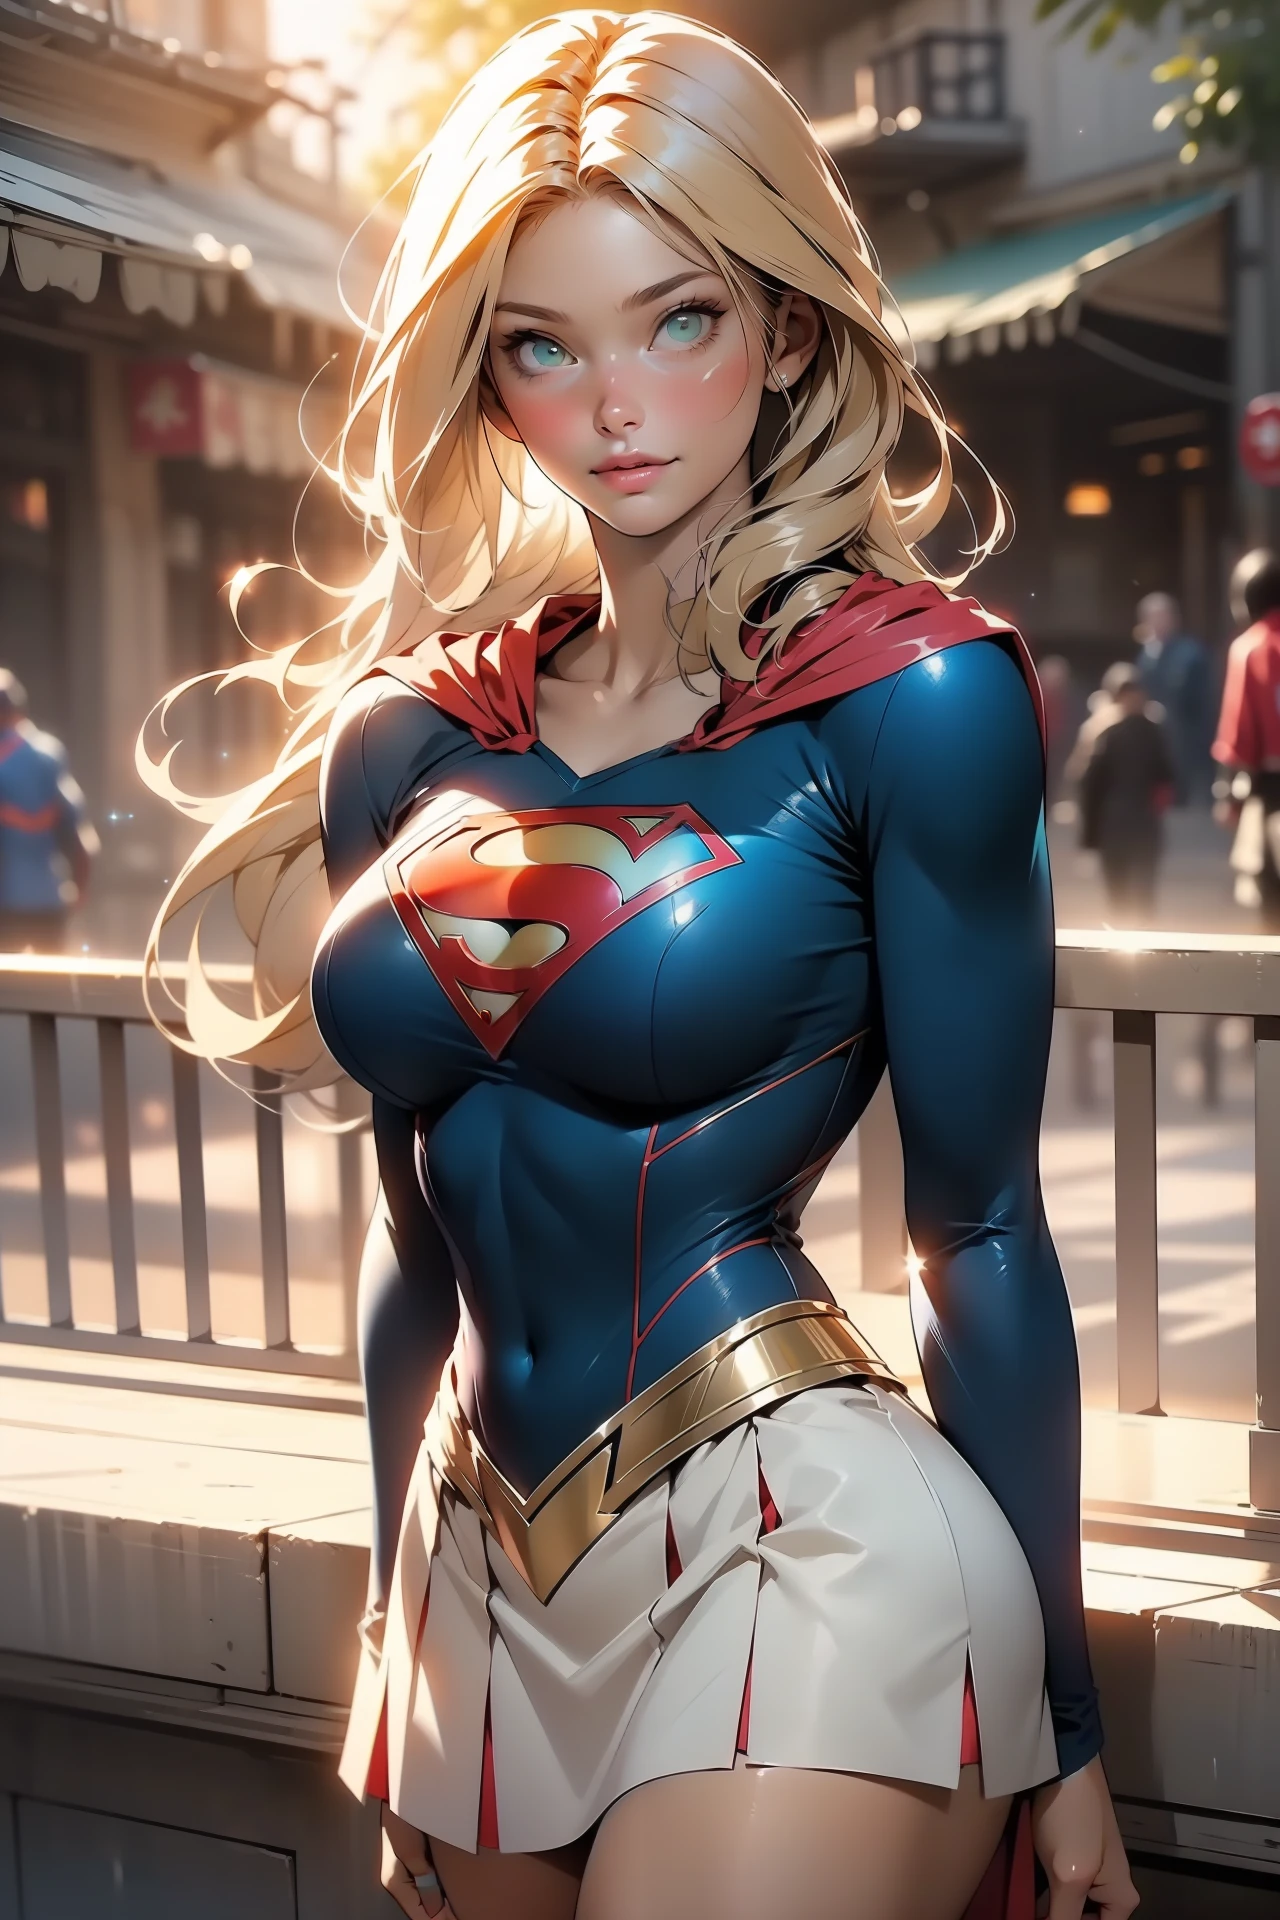 nsfw: 1.5, masterpiece, best quality, high quality, high definition, high quality textures, high quality shadows, high definition, beautiful detail, highly detailed CG, detailed textures, realistic representation of faces, realistic, colorful, delicate , cinematic lights, side lights, lens flares, ray tracing, sharp focus, supergirl, ((best quality, masterpiece, absurd, 8k)), 1 girl, solo, 21 years old,Supergirl(Helen Slater), huge breasts, huge breasts, long hair down to her hips, long hair,low hair, voluminous hair, white skin tone, green eyes, sparkling expressive eyes, huge breasts, she is supergirl, Supergirl cosplay , japanese sailor  female cosplay Supergirl, stocking 7/8 ,superman suit, blushing, embarrassed expression, shy smile, building terrace, daytime, pretty, young woman, hands behind) (1girl, __focus__:1.3), (intricate details, makeup , PureErosFace_V1:0.5), (delicate beautiful face with details, Delicate eyes beautiful in details, perfect face proportions, dense skin, ideal proportion of four fingers and one thumb, arms under the chest, huge breasts, miniskirt,upskirt,wide hips, flat upper abdomen , thin, dressed, blonde: 1.3), bed, no hands